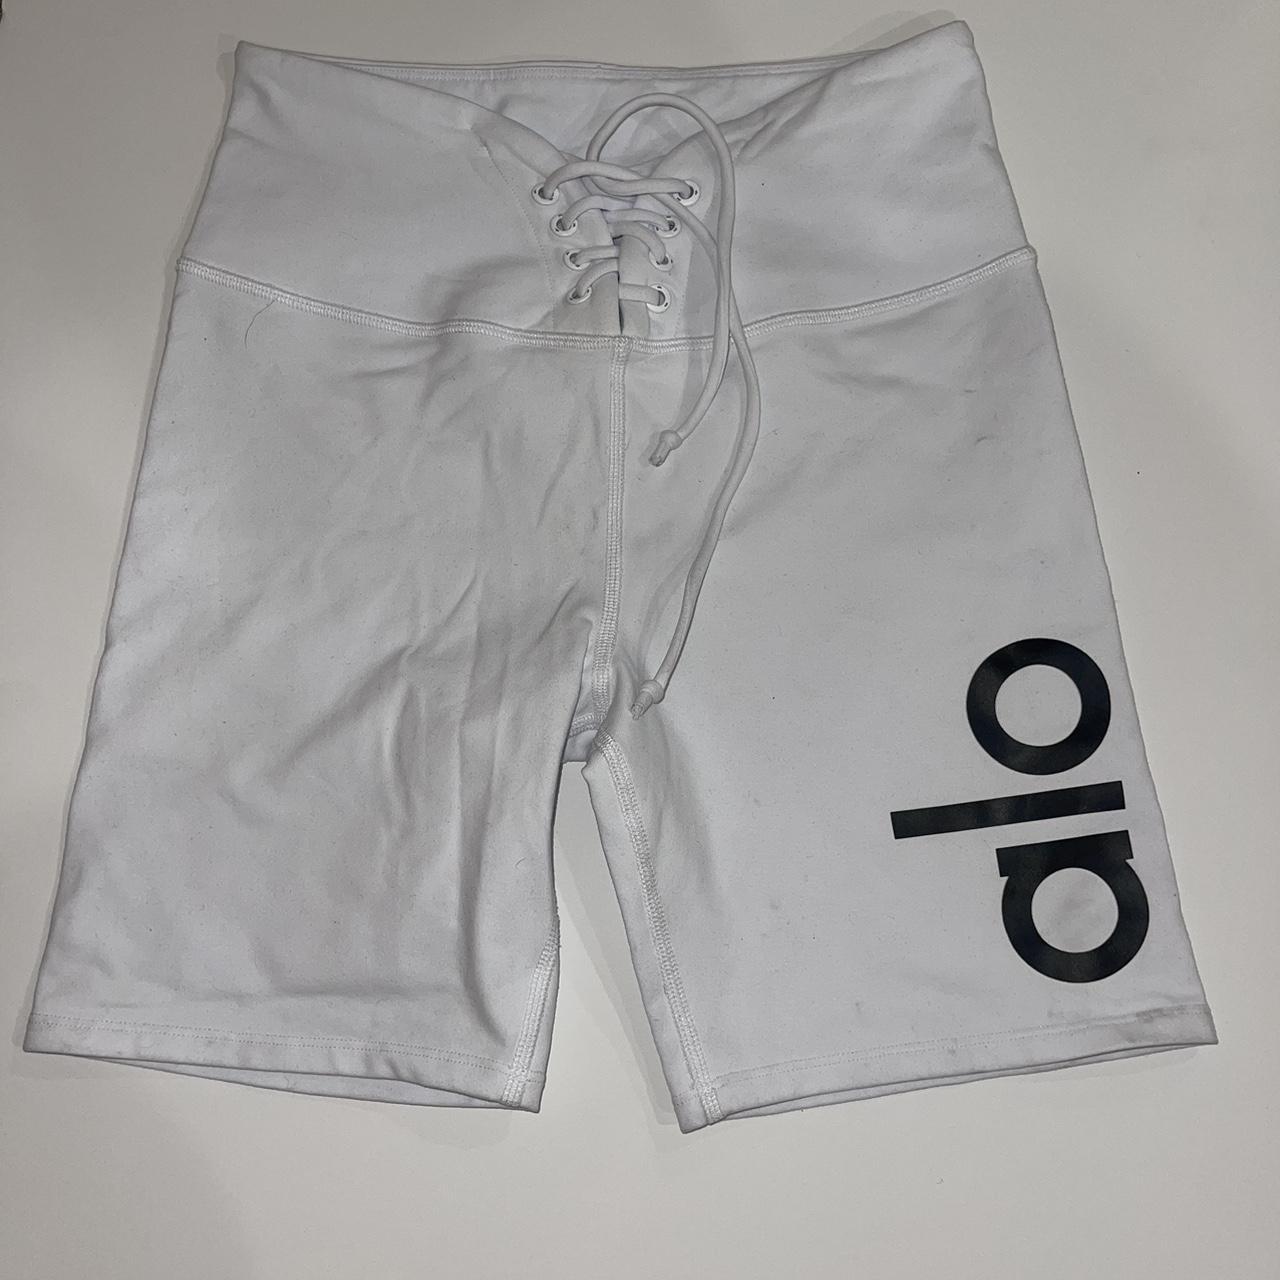 Alo Yoga Dreamy Short White Size XS Has a stain on - Depop